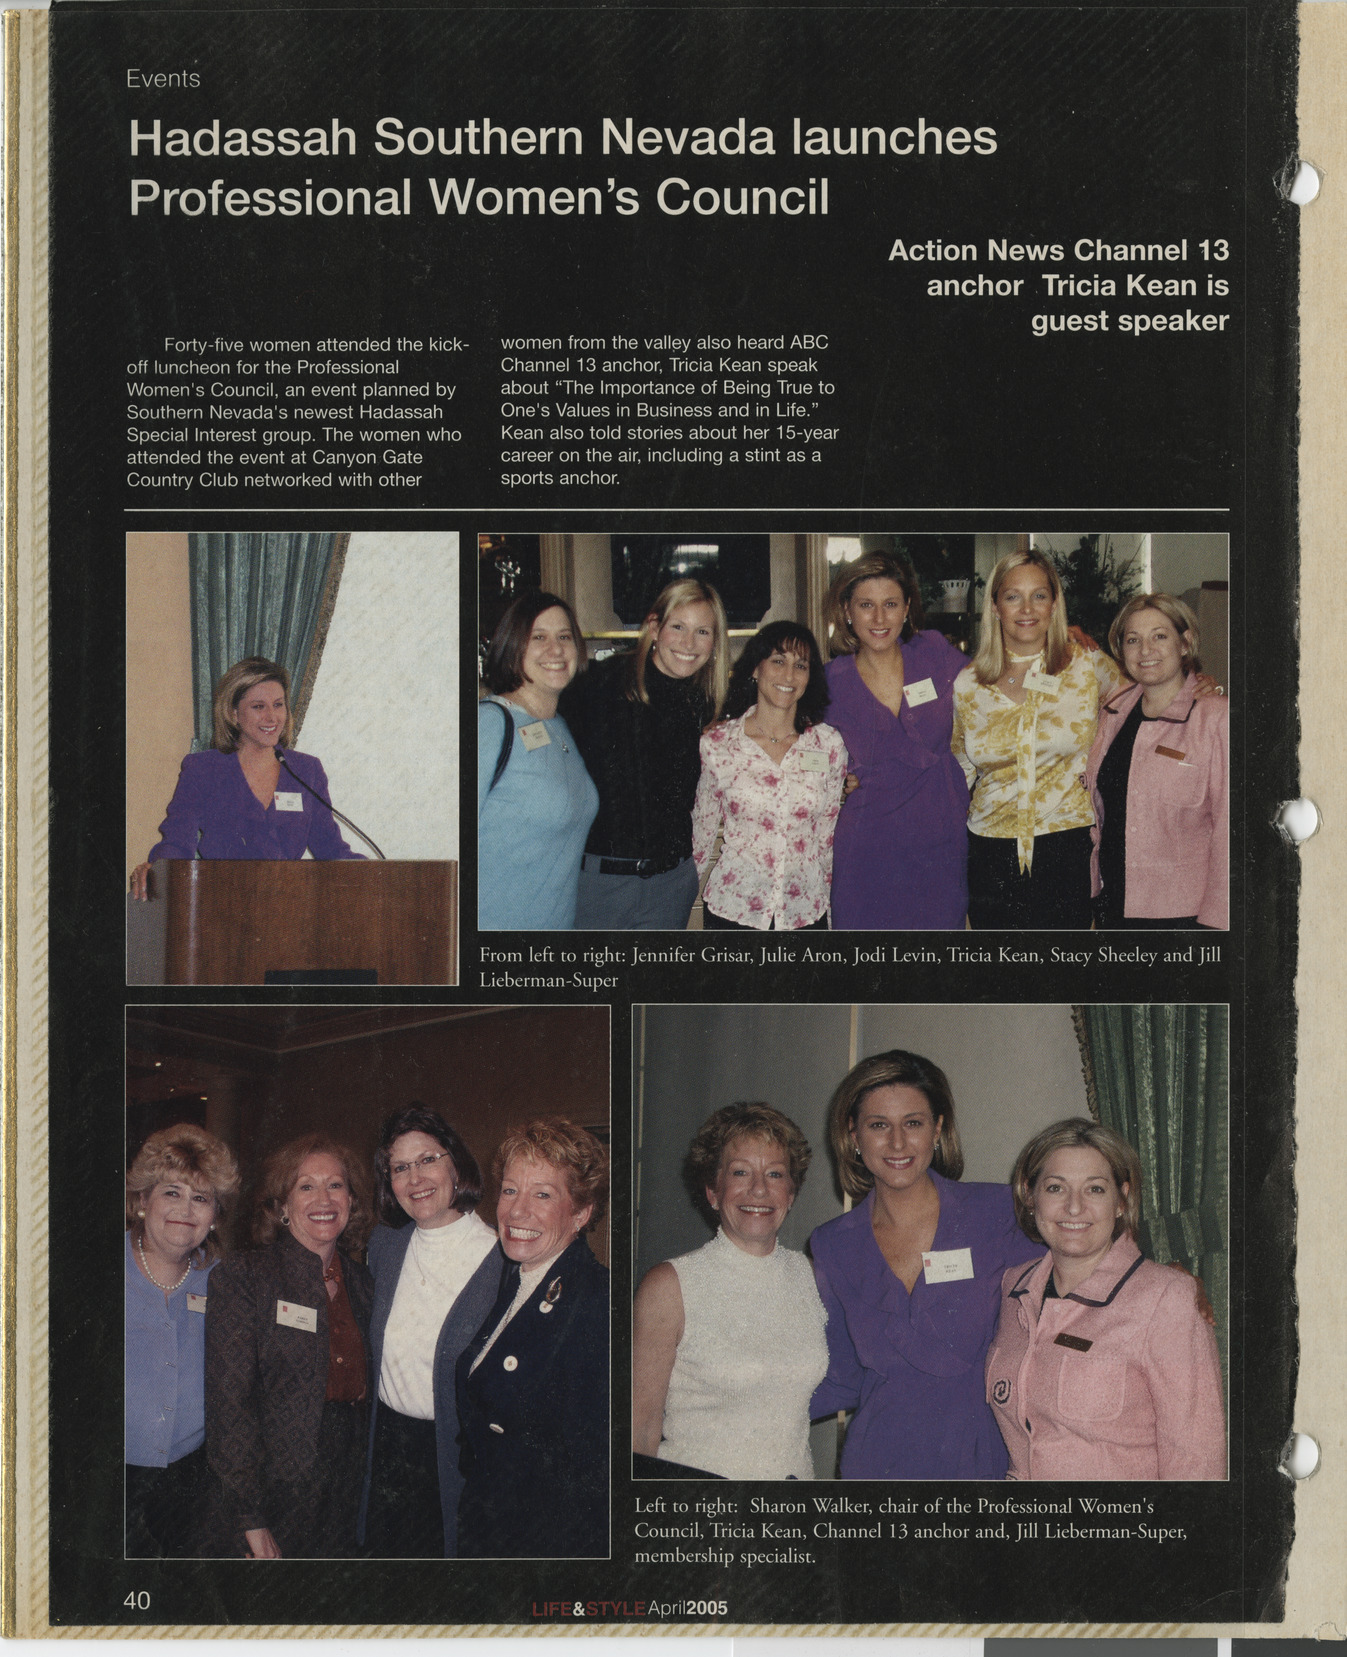 Clipping, Hadassah Southern Nevada launches Professional Women's Council, Life and Style magazine, April 2005